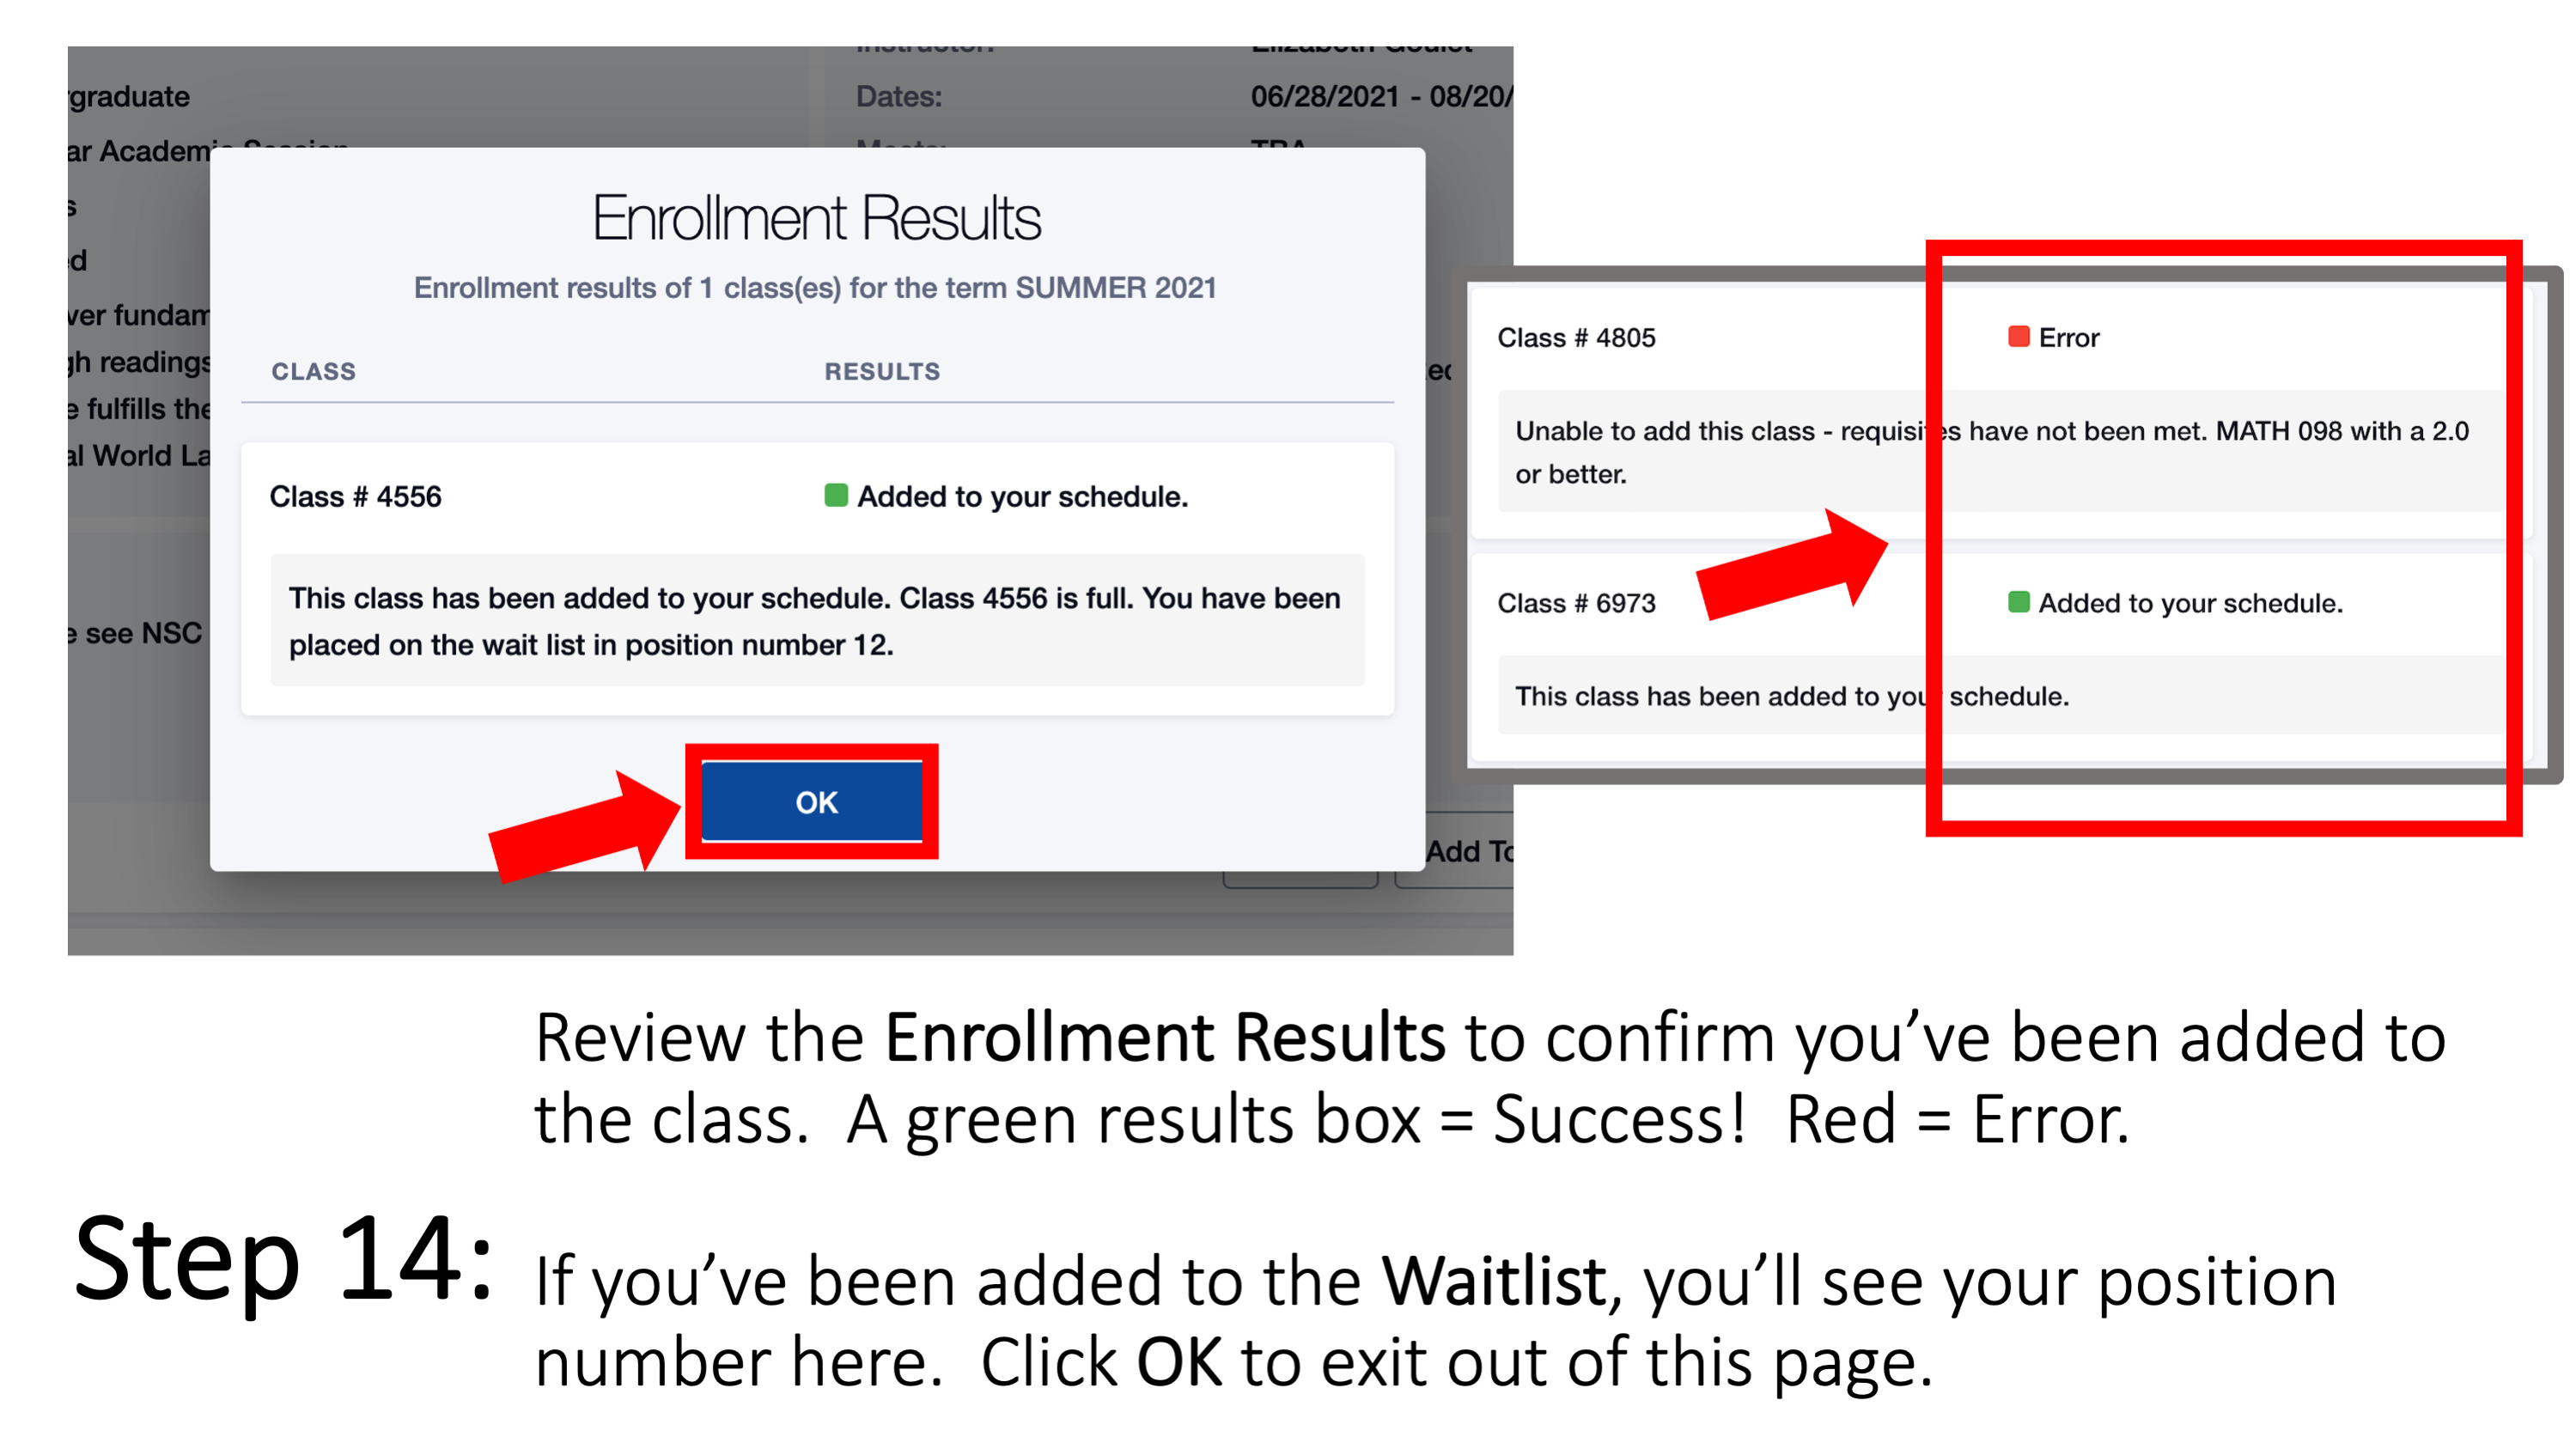 Step 14: Review the Enrollment Results to confirm you’ve been added to the class.  A green results box = Success! Red = Error. If you’ve been added to the Waitlist, you’ll see your position number here.  Click OK to exit out of this page.